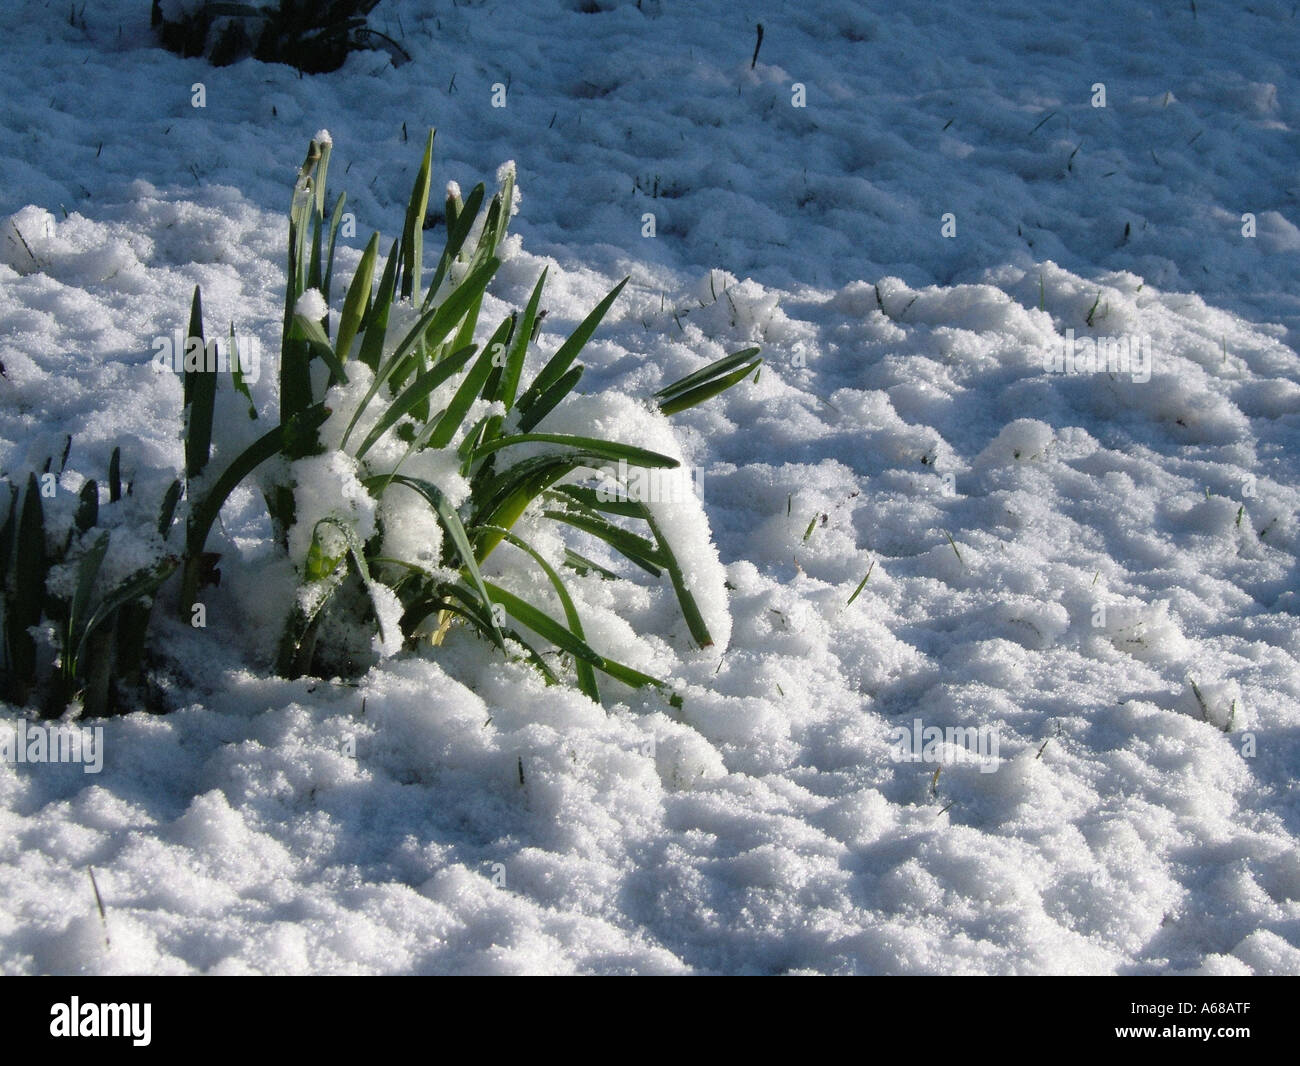 Strap-like leaves of the Galanthus emerging through the snow. Stock Photo